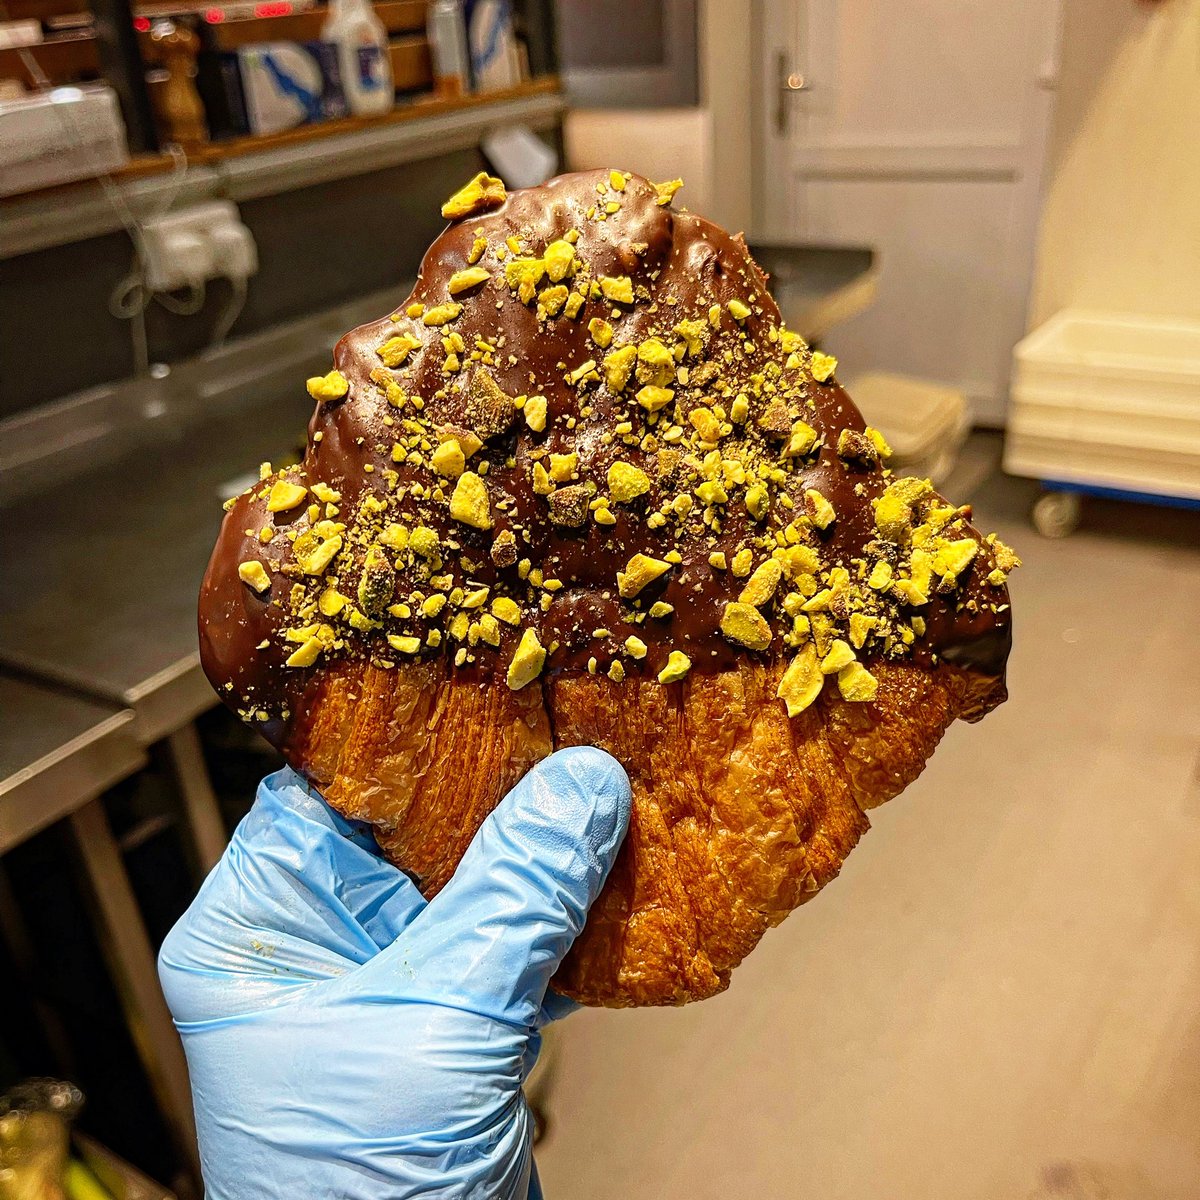 a croissant but flattened, dipped in chocolate ganache & covered in pistachios?